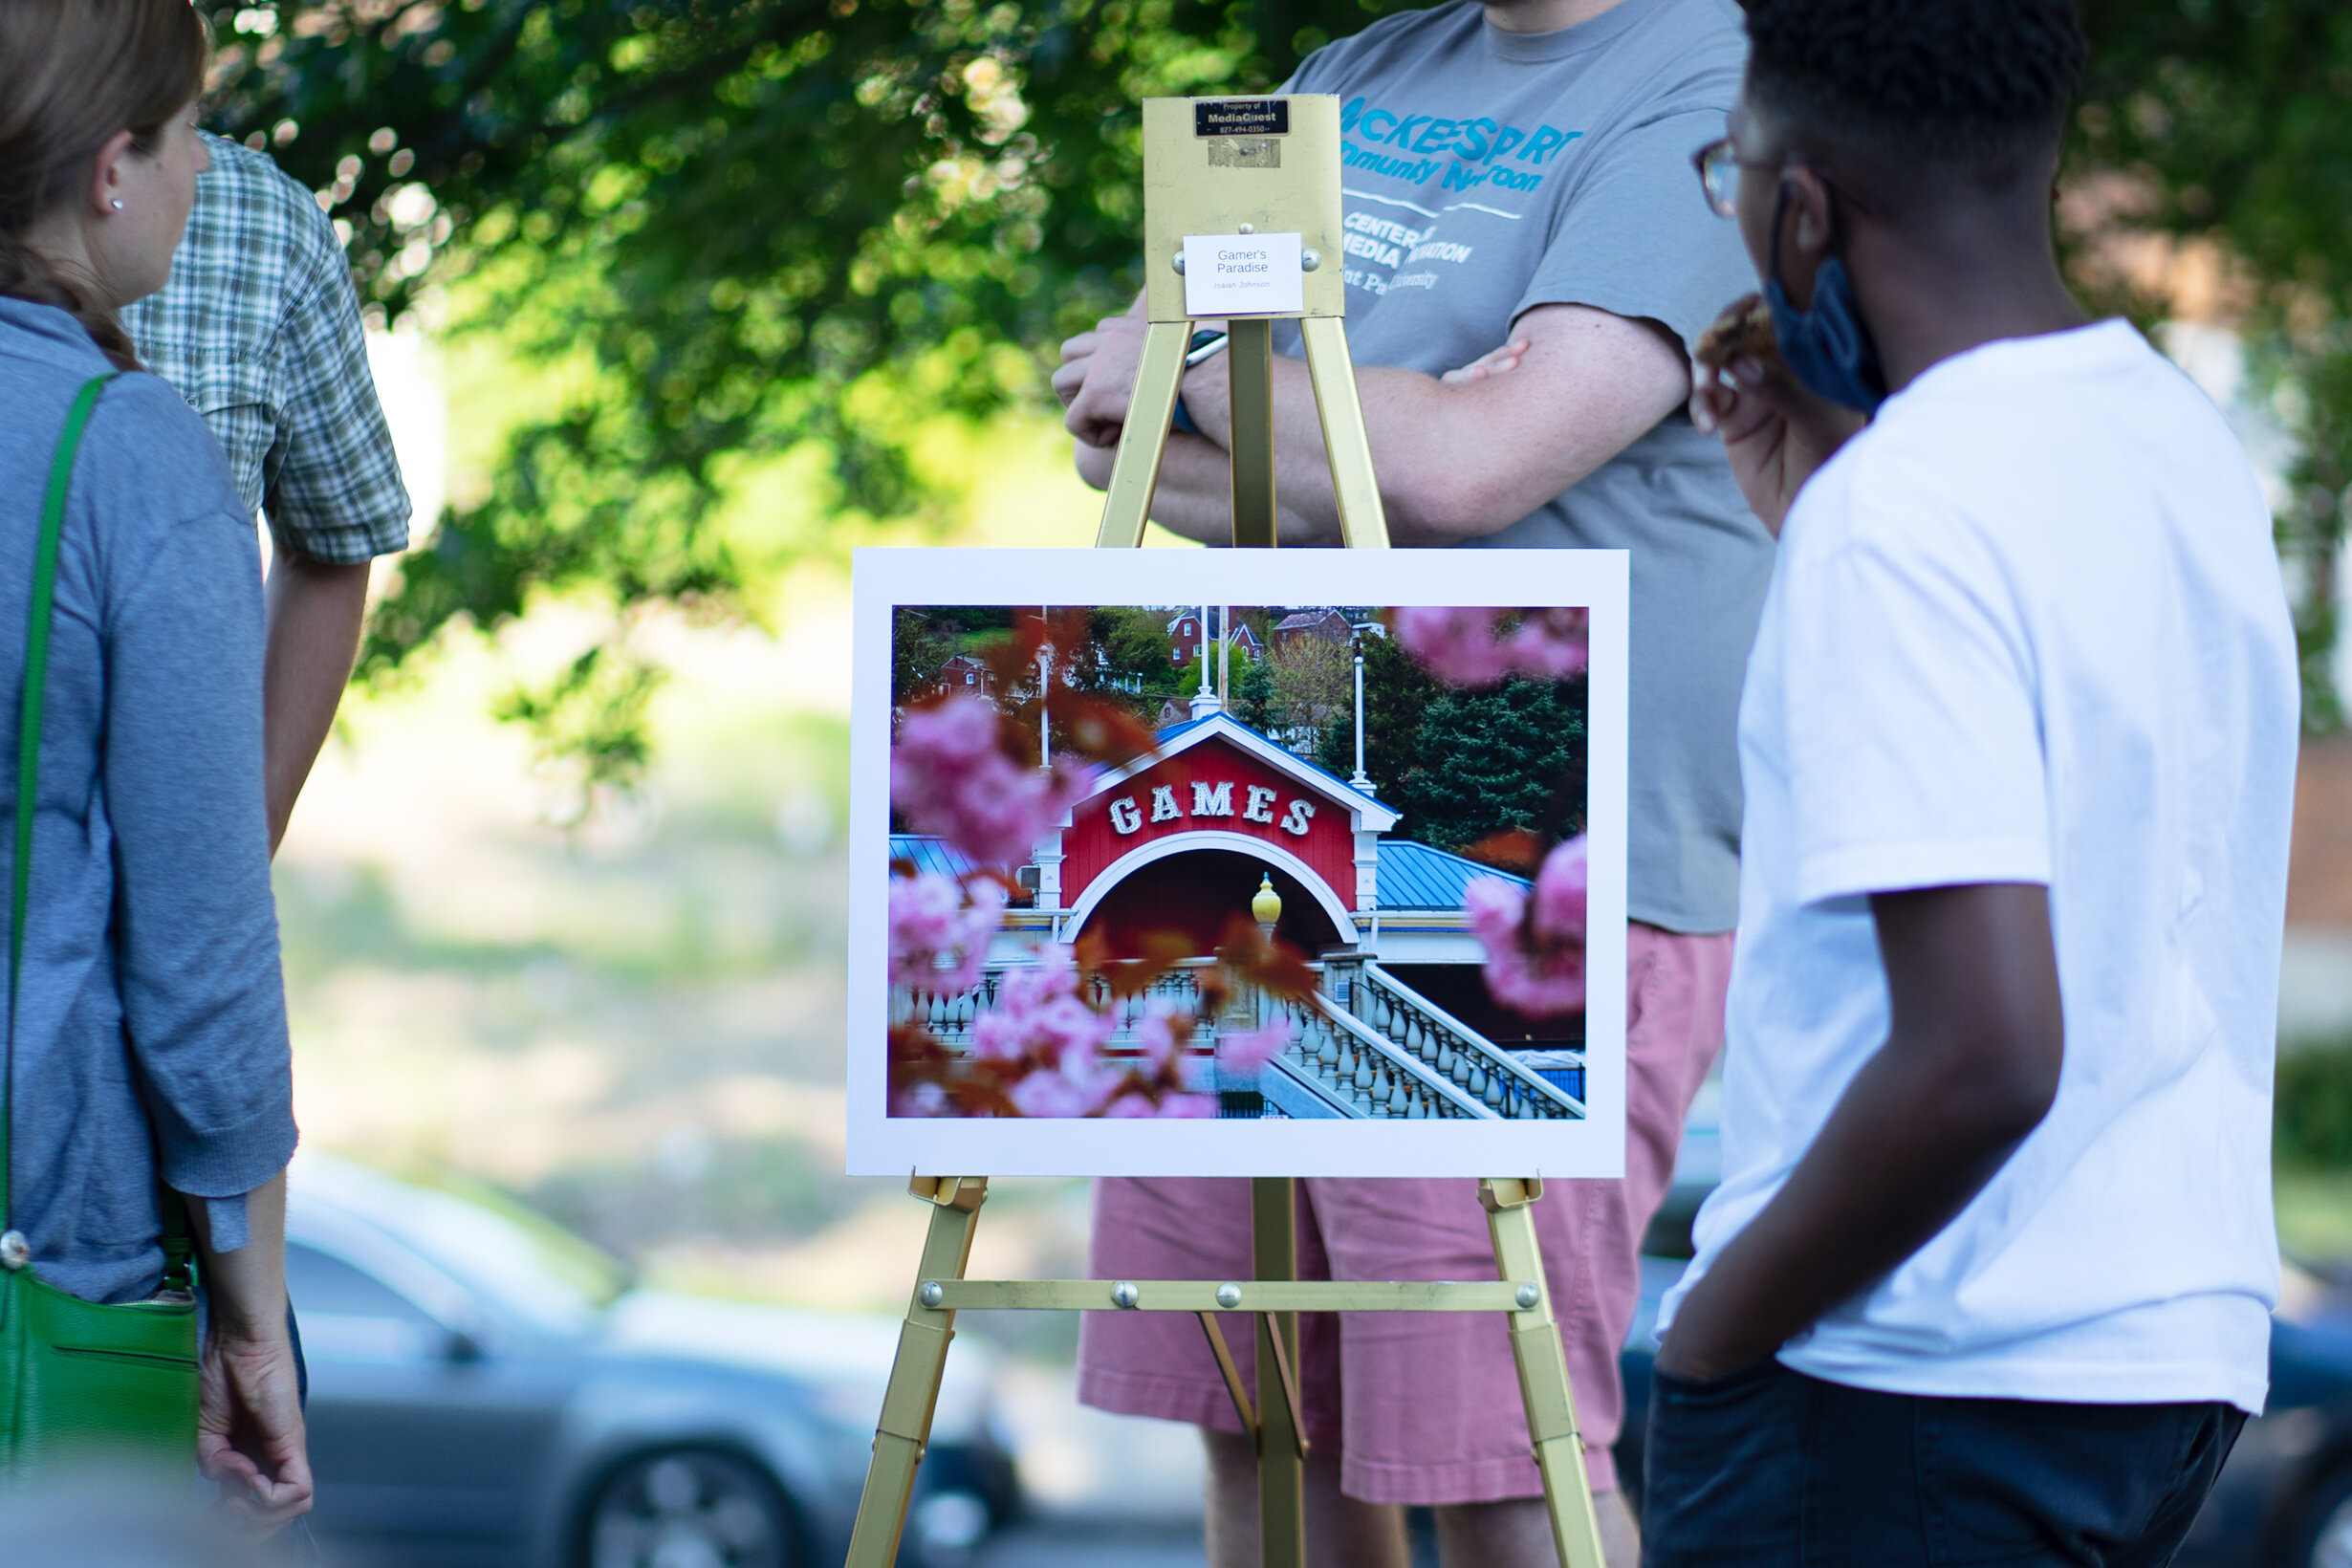  Isaiah Johnson’s photograph of Kennywood was one of the 11 images on display at the event.  